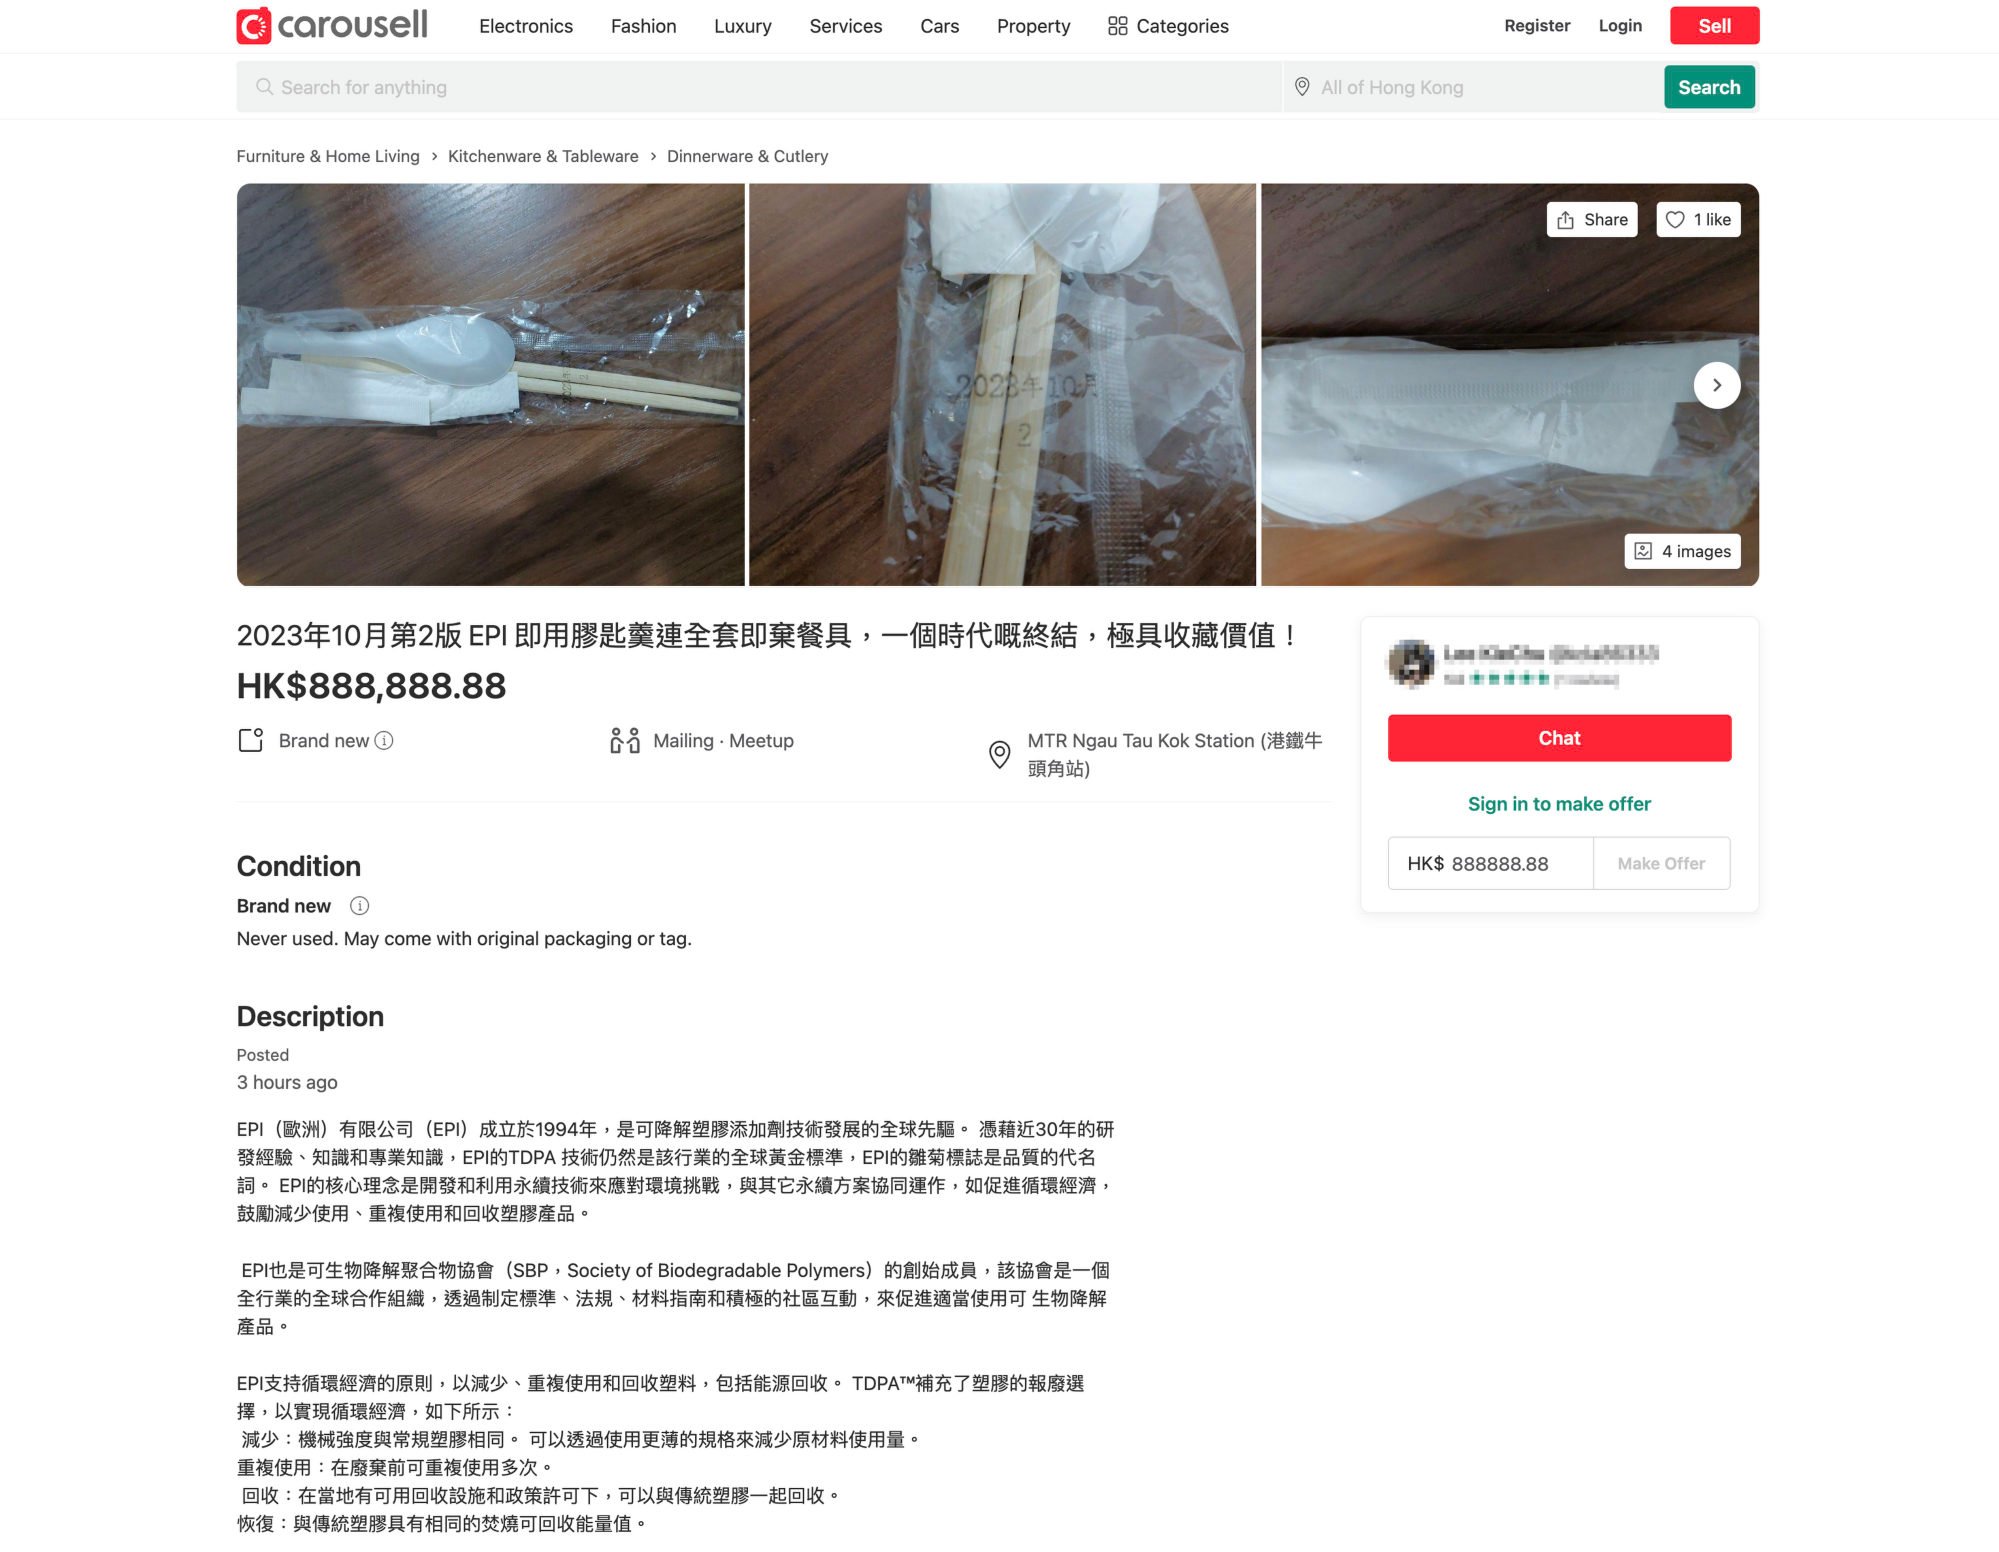 One listing on the Carousell trading platform seeking nearly HK$900,000 for a cutlery set. Photo: SCMP